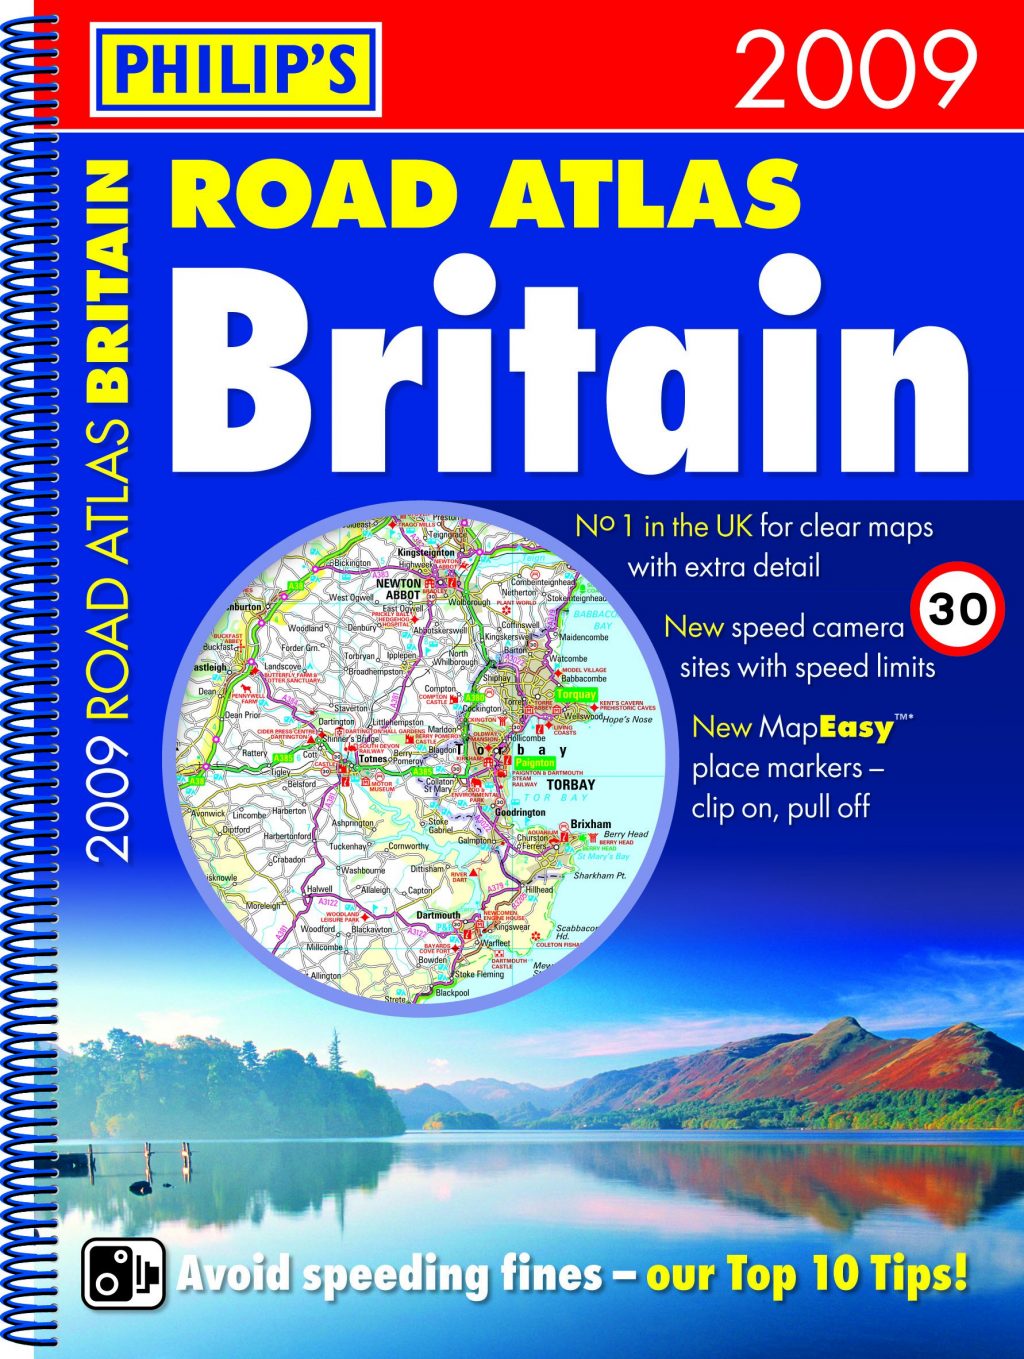 Road atlases are still a driving force Wheel World Reviews